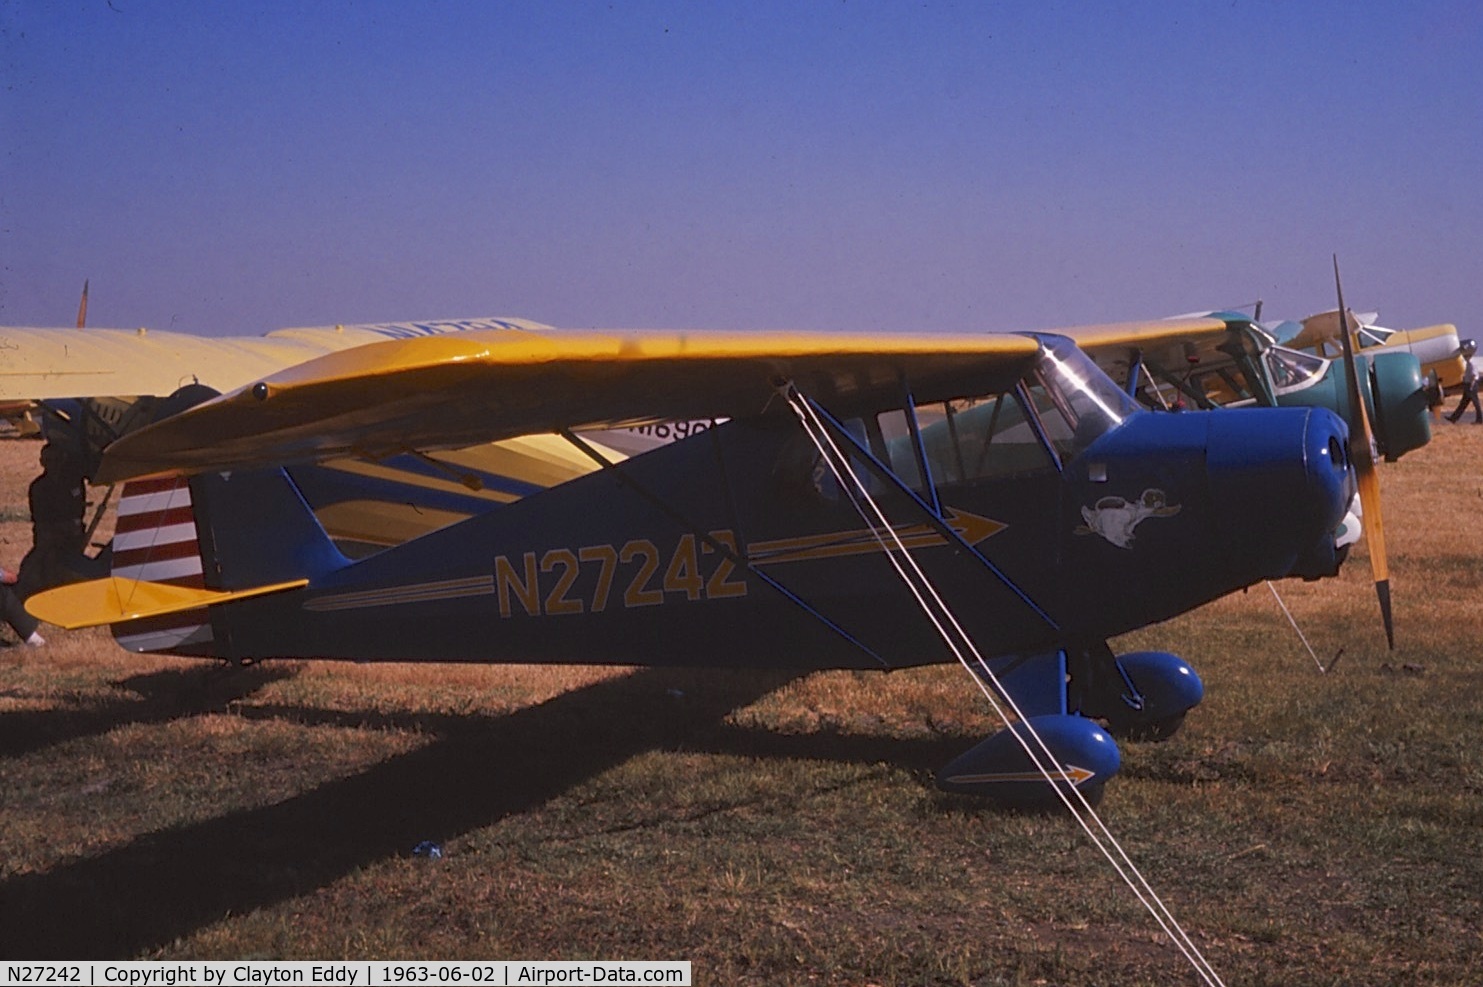 N27242, 1940 Porterfield LP-65 C/N 731, June 1963. Might be Paso Robles California.